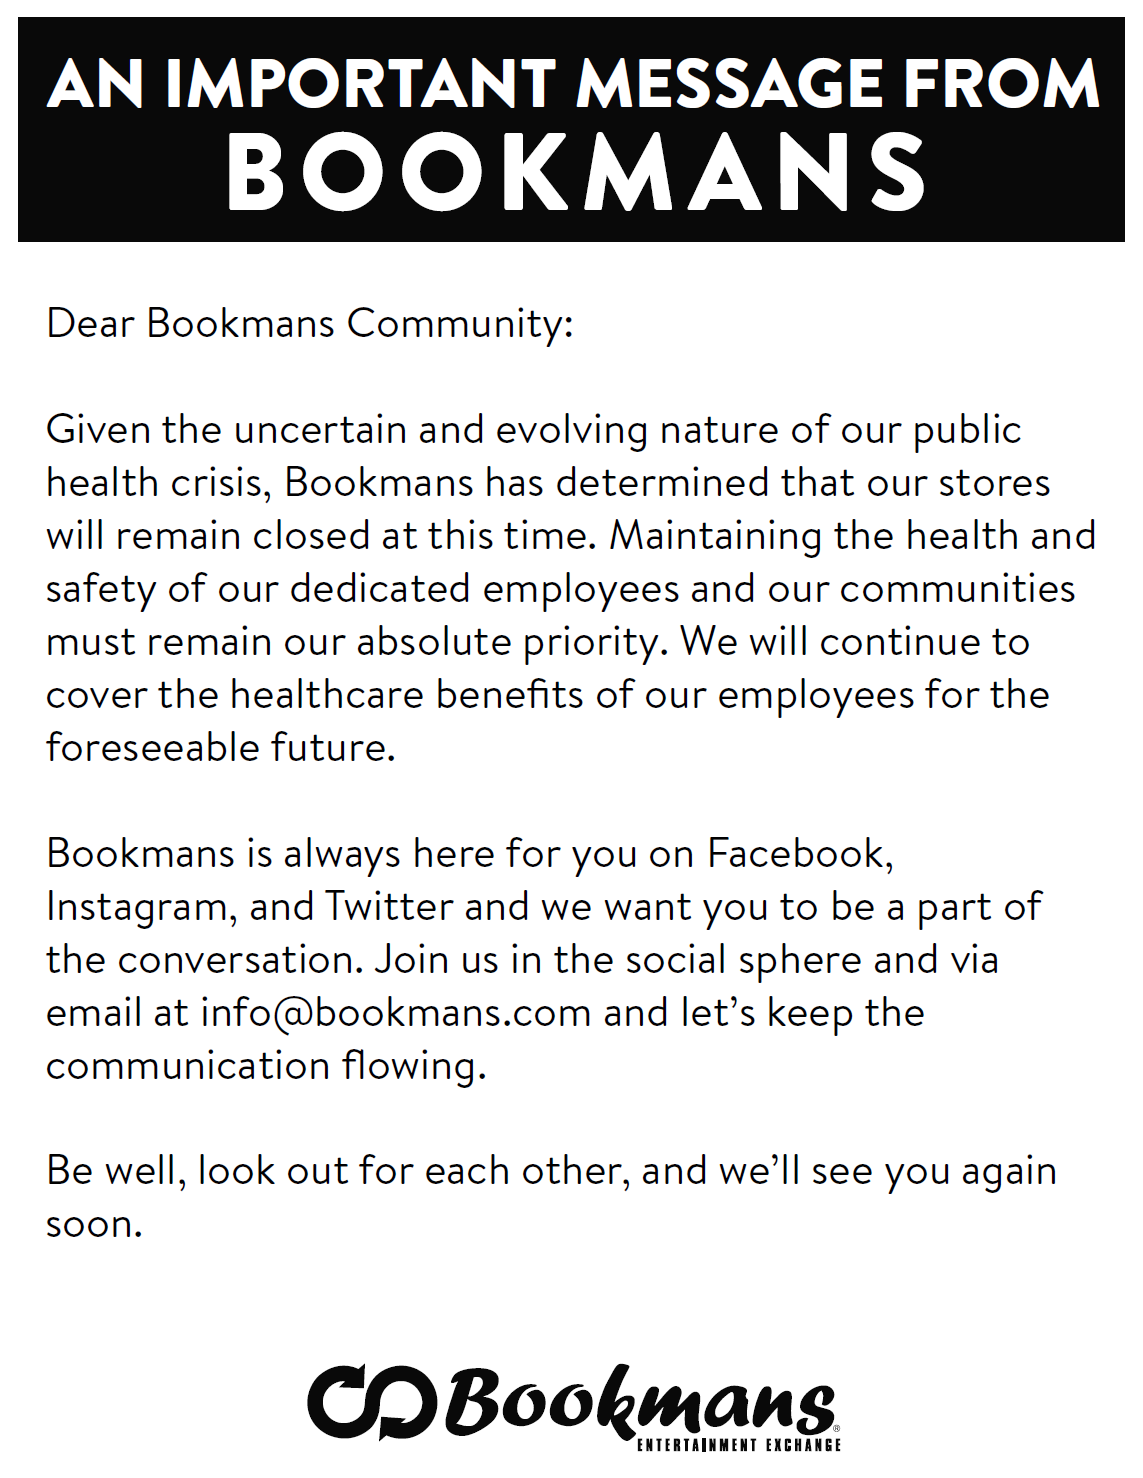 bookmans update on closure march 27 2020